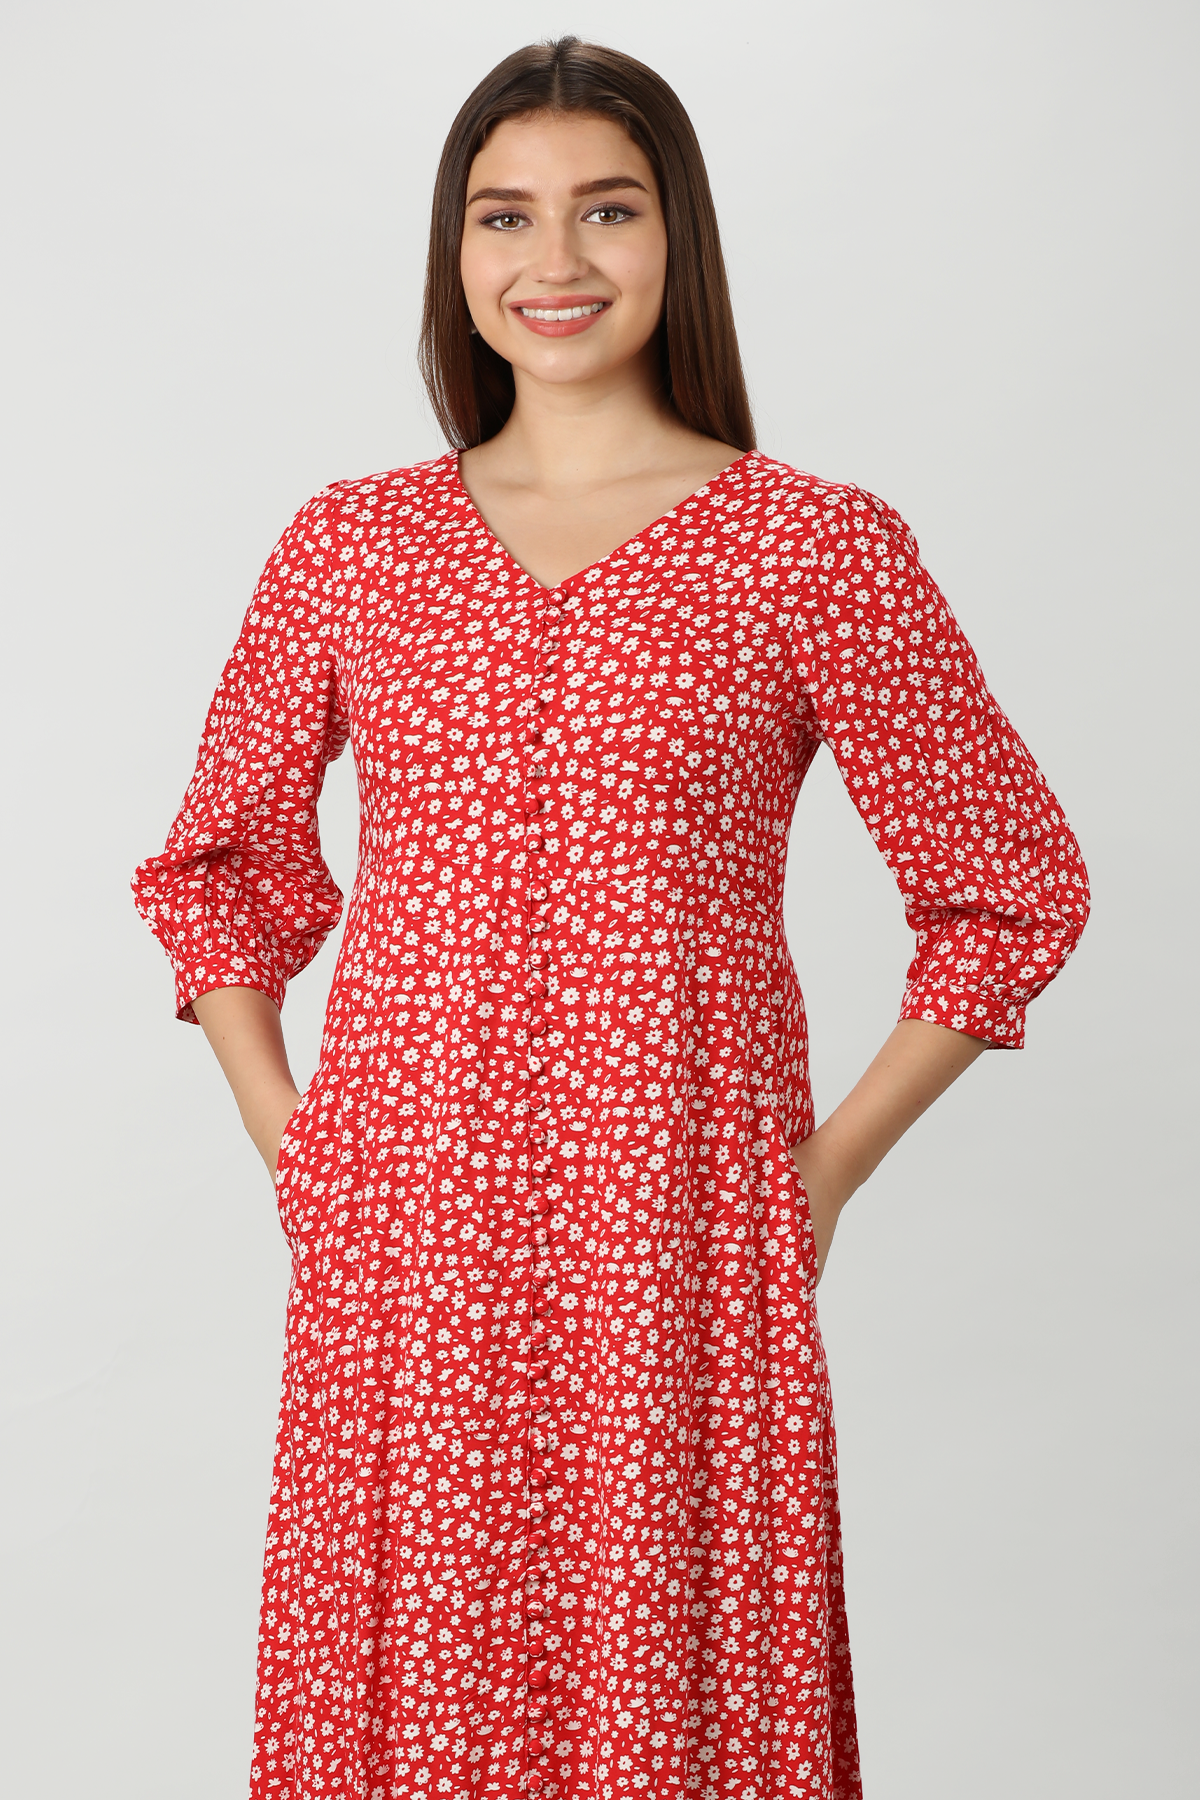 Red & White Floral Printed Dress